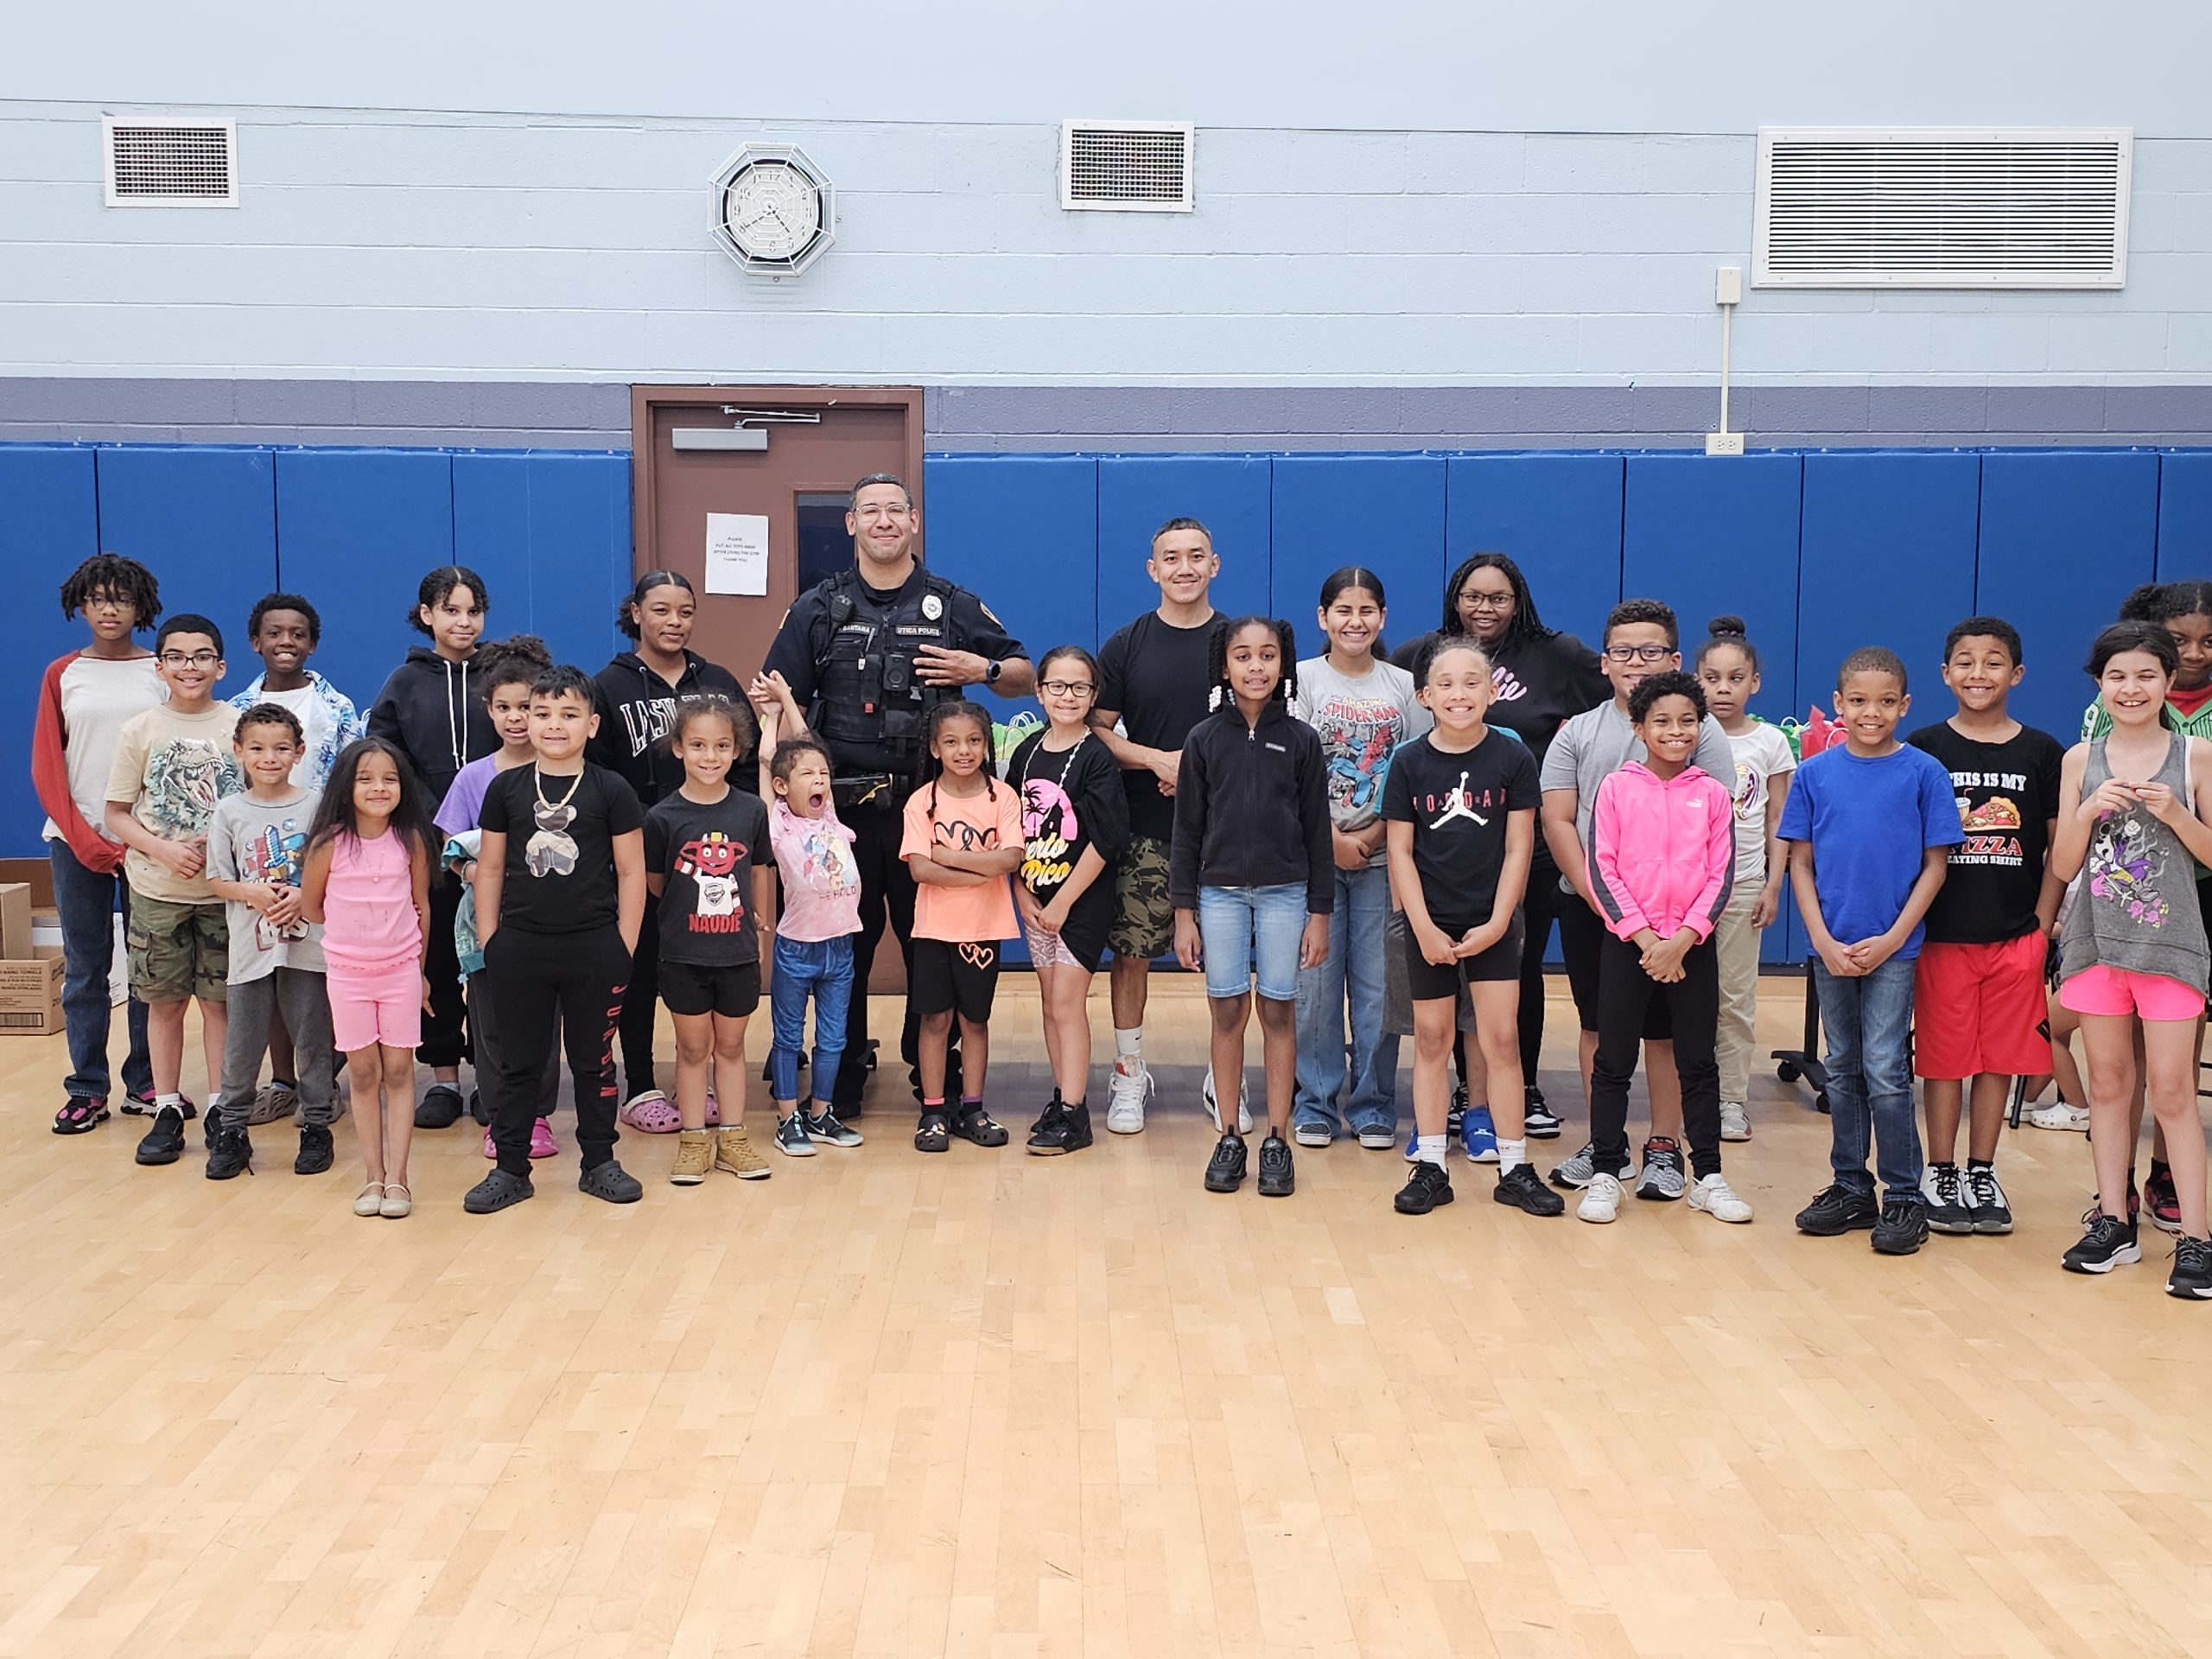 The Neighborhood Center’s Outreach & Prevention Program delivered 77 care packages to the officers of the Utica Police Department background image